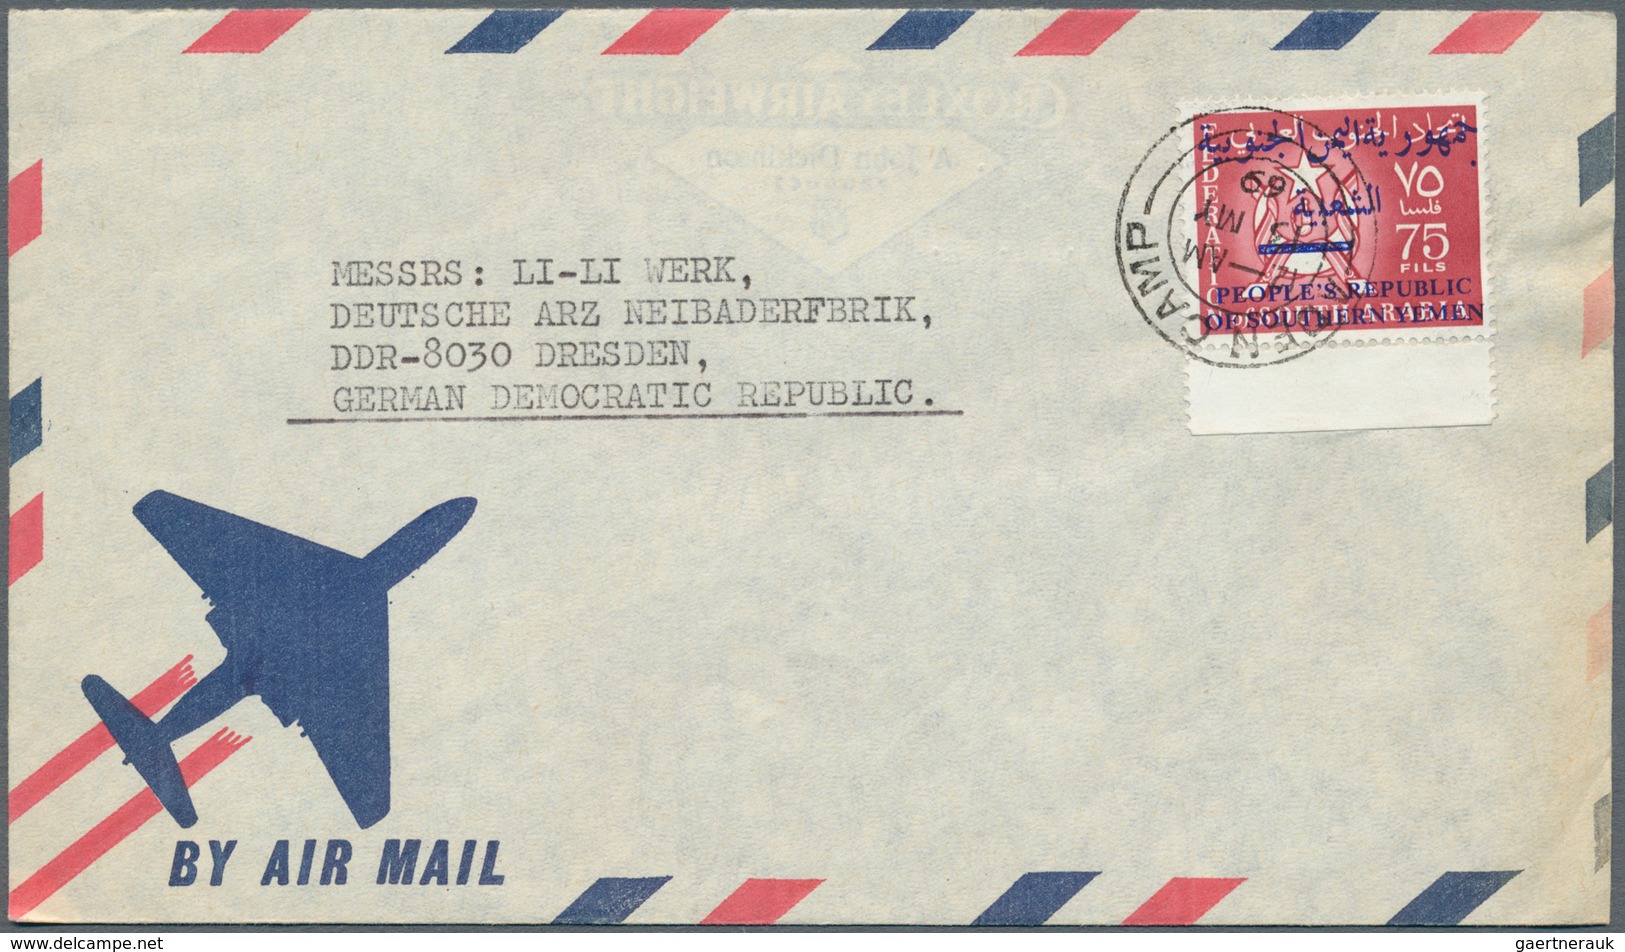 Jemen: 1935/80 (ca.), Lot of 51 comercial covers, many airmails, some interesting cancellations, mos